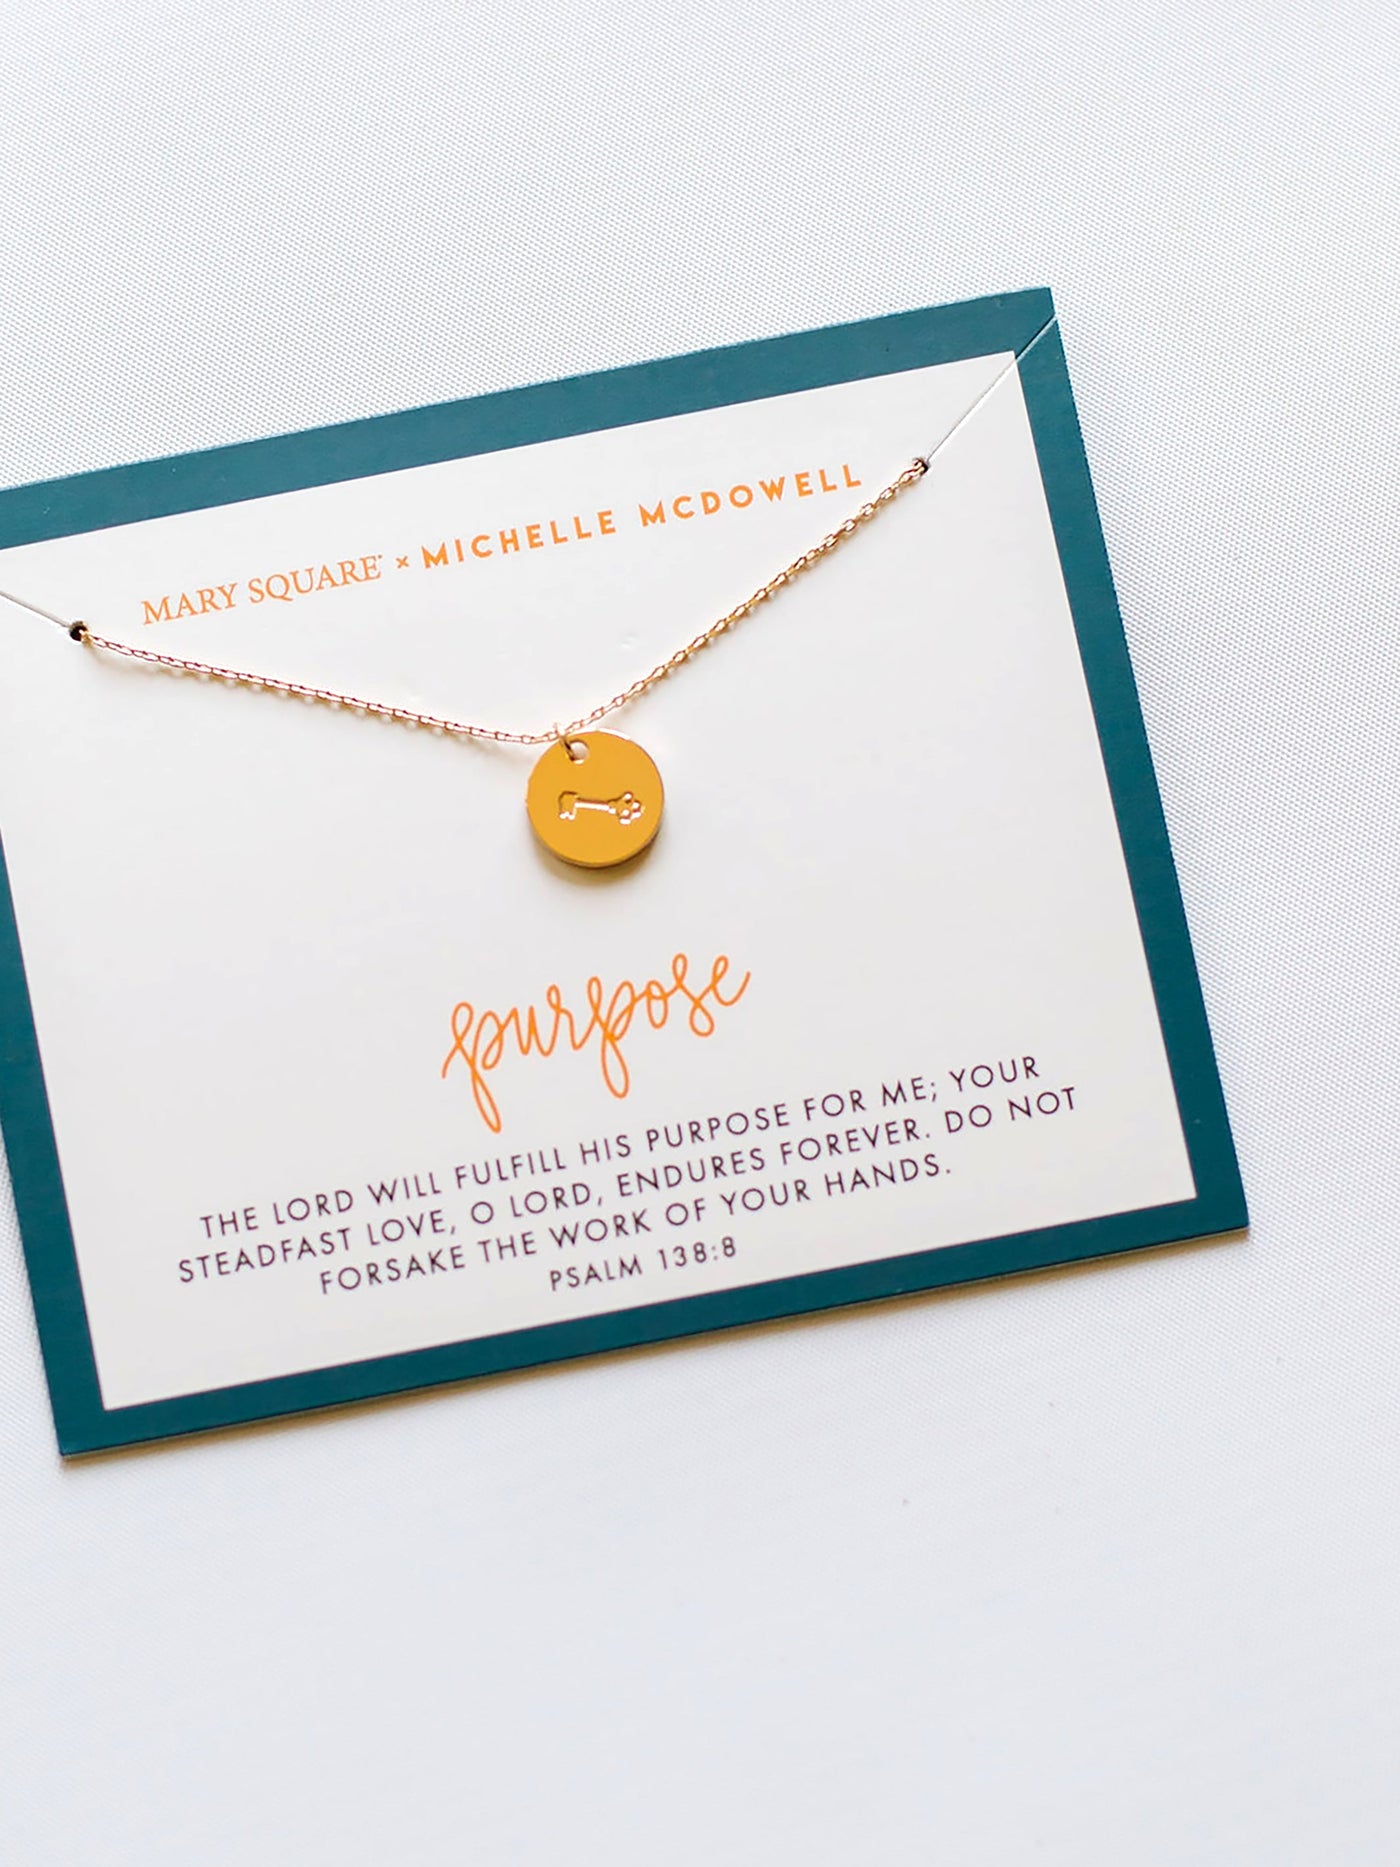 Purpose Inspirational Necklace - Mary Square, LLC